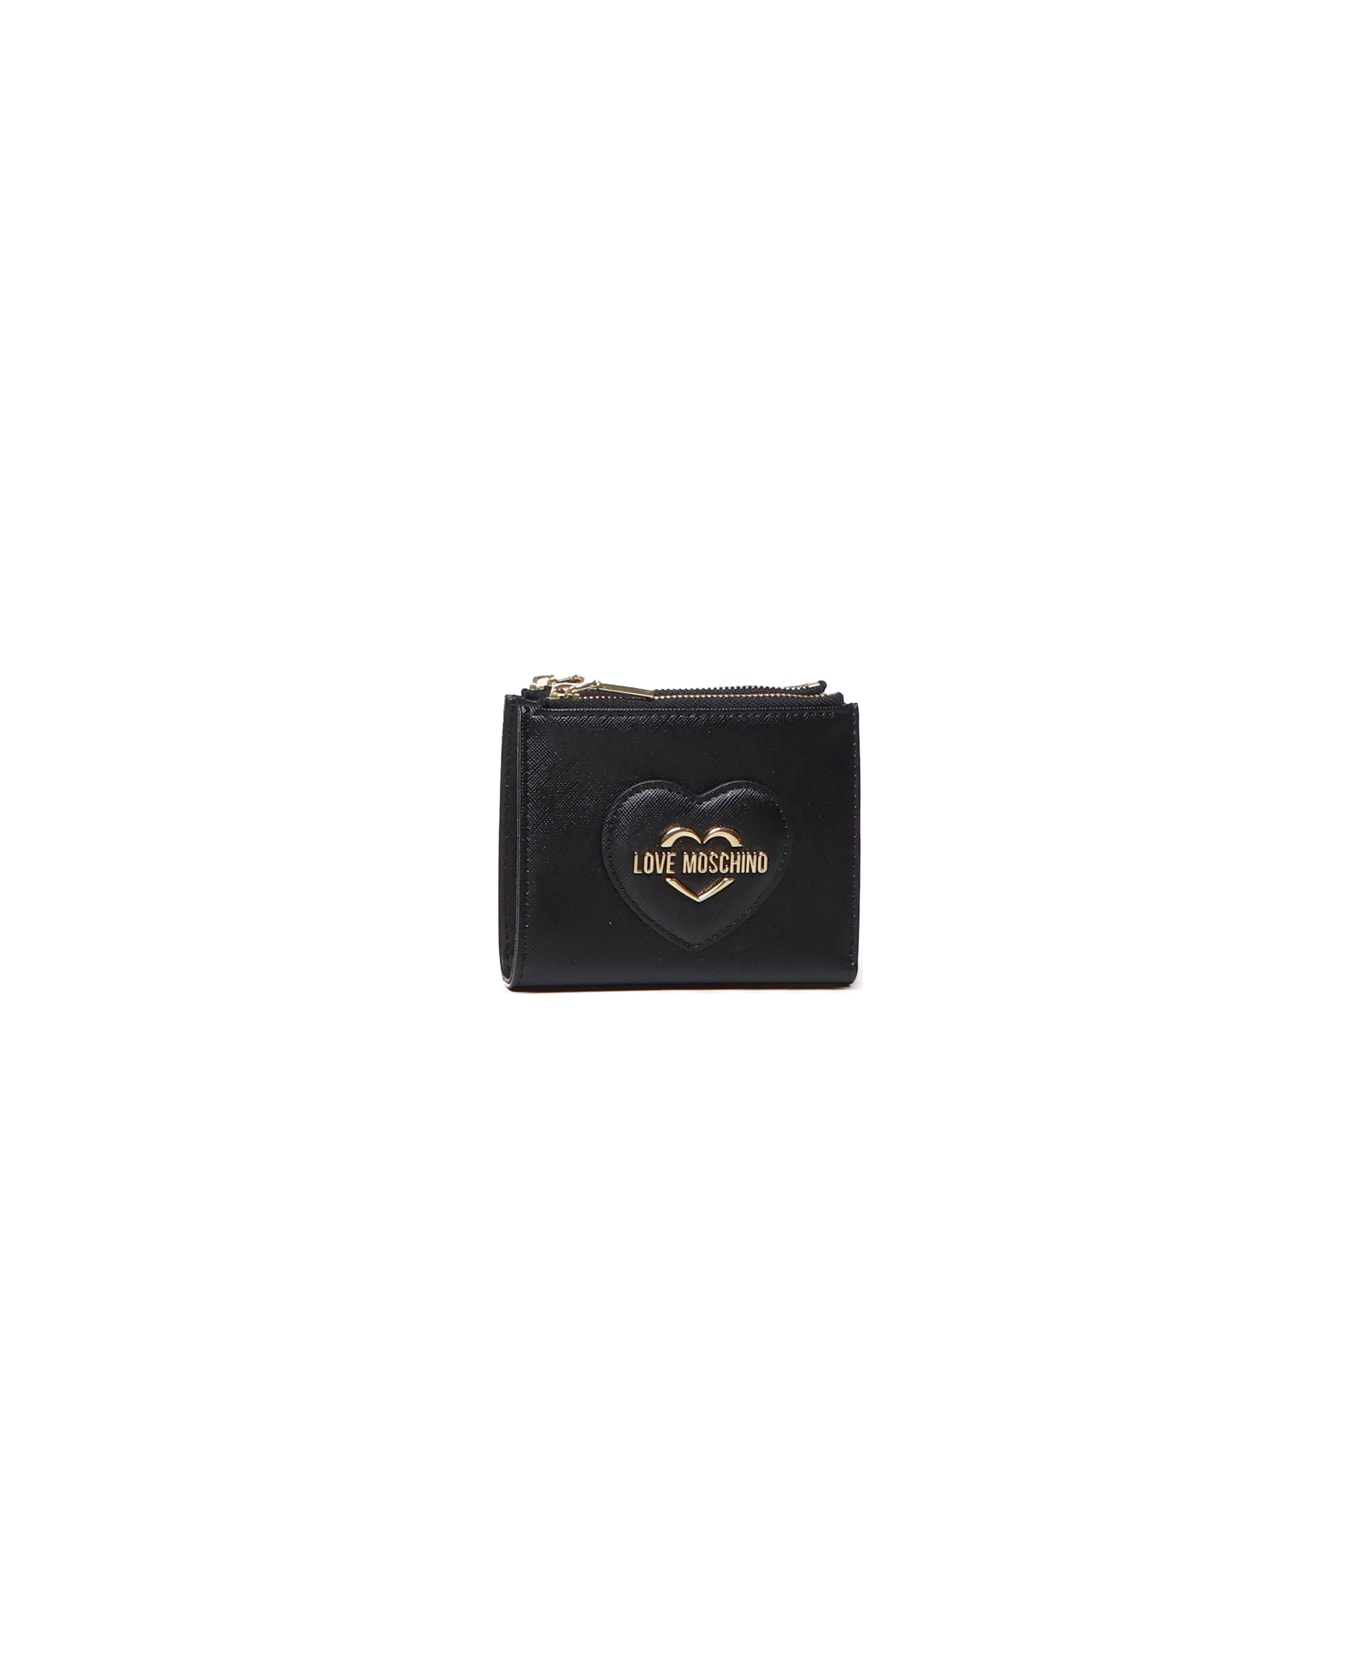 Love Moschino Wallet With Print - Black 財布